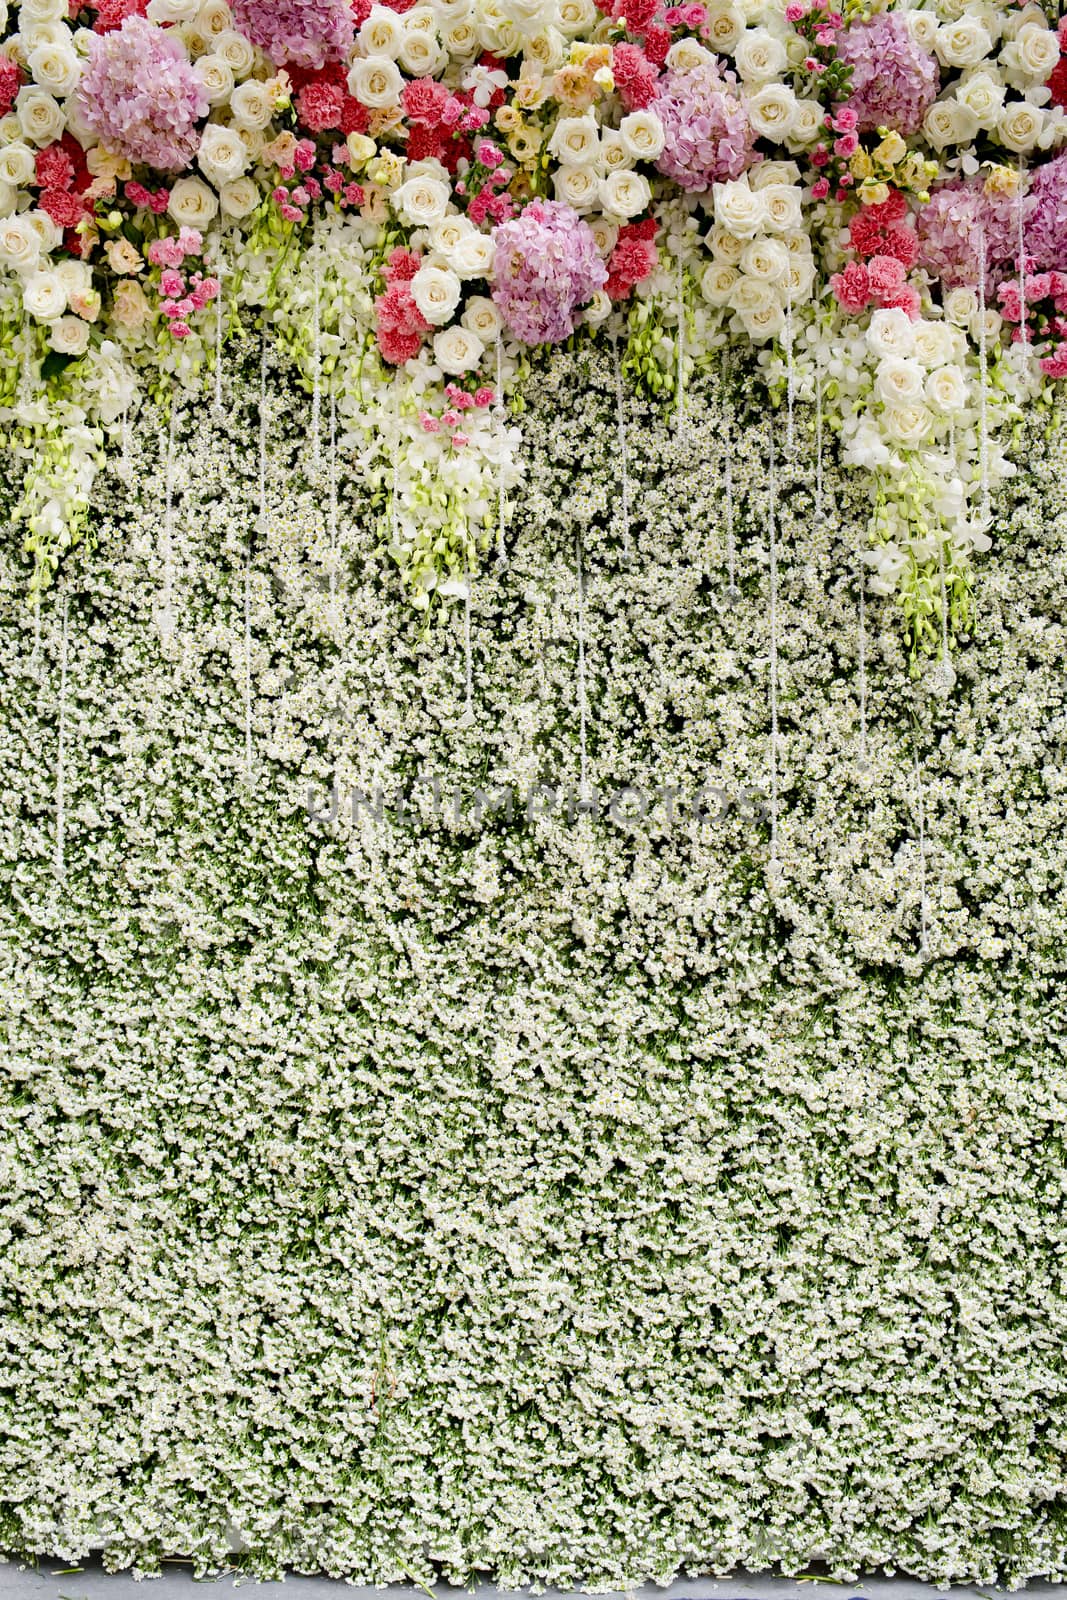 Colorful flowers with green wall for wedding backdrop by art9858